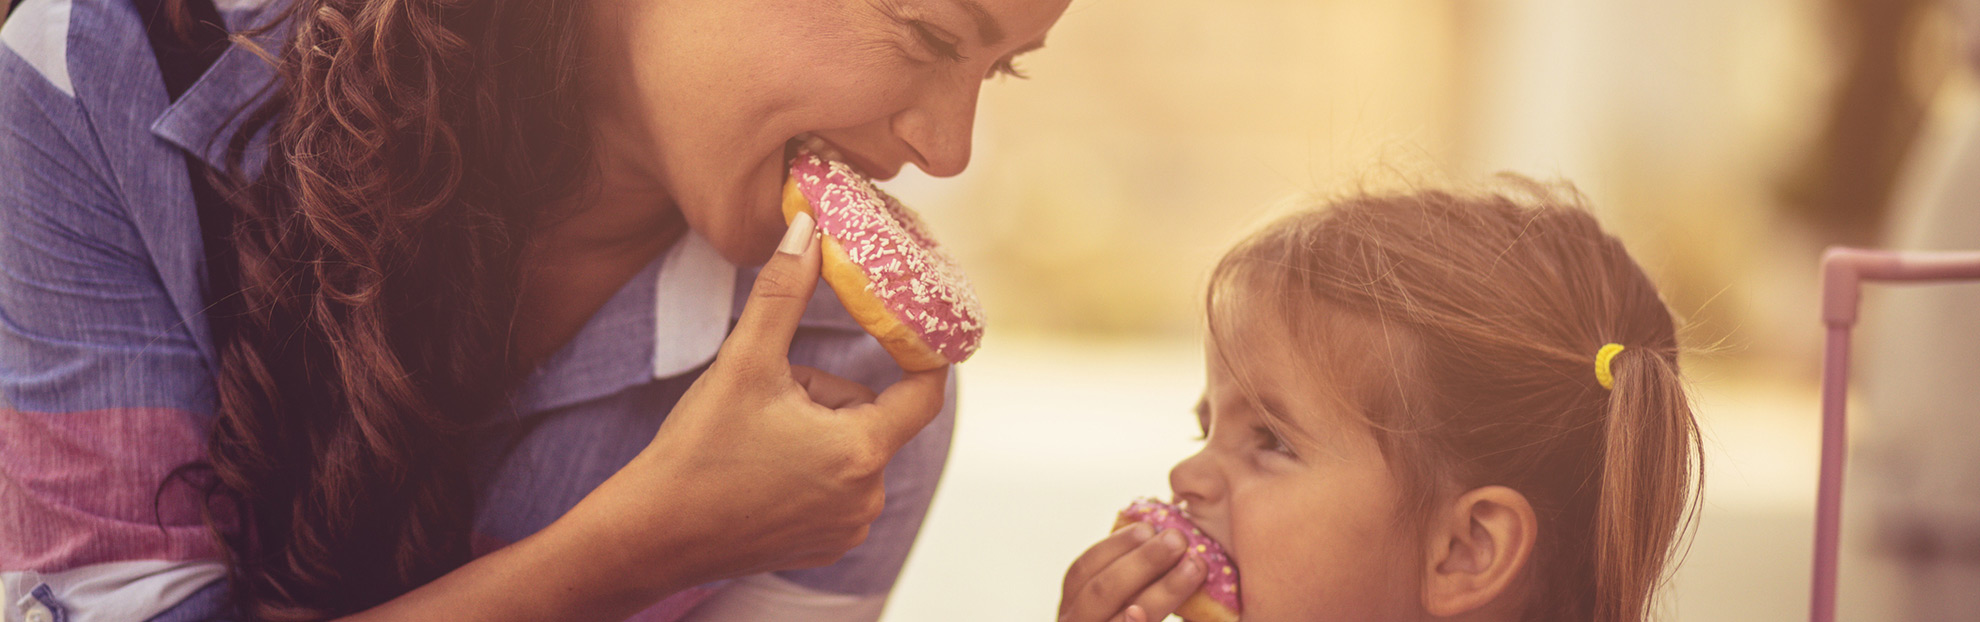 Arizona LASIK eye surgery patient happily eating donuts with her daughter